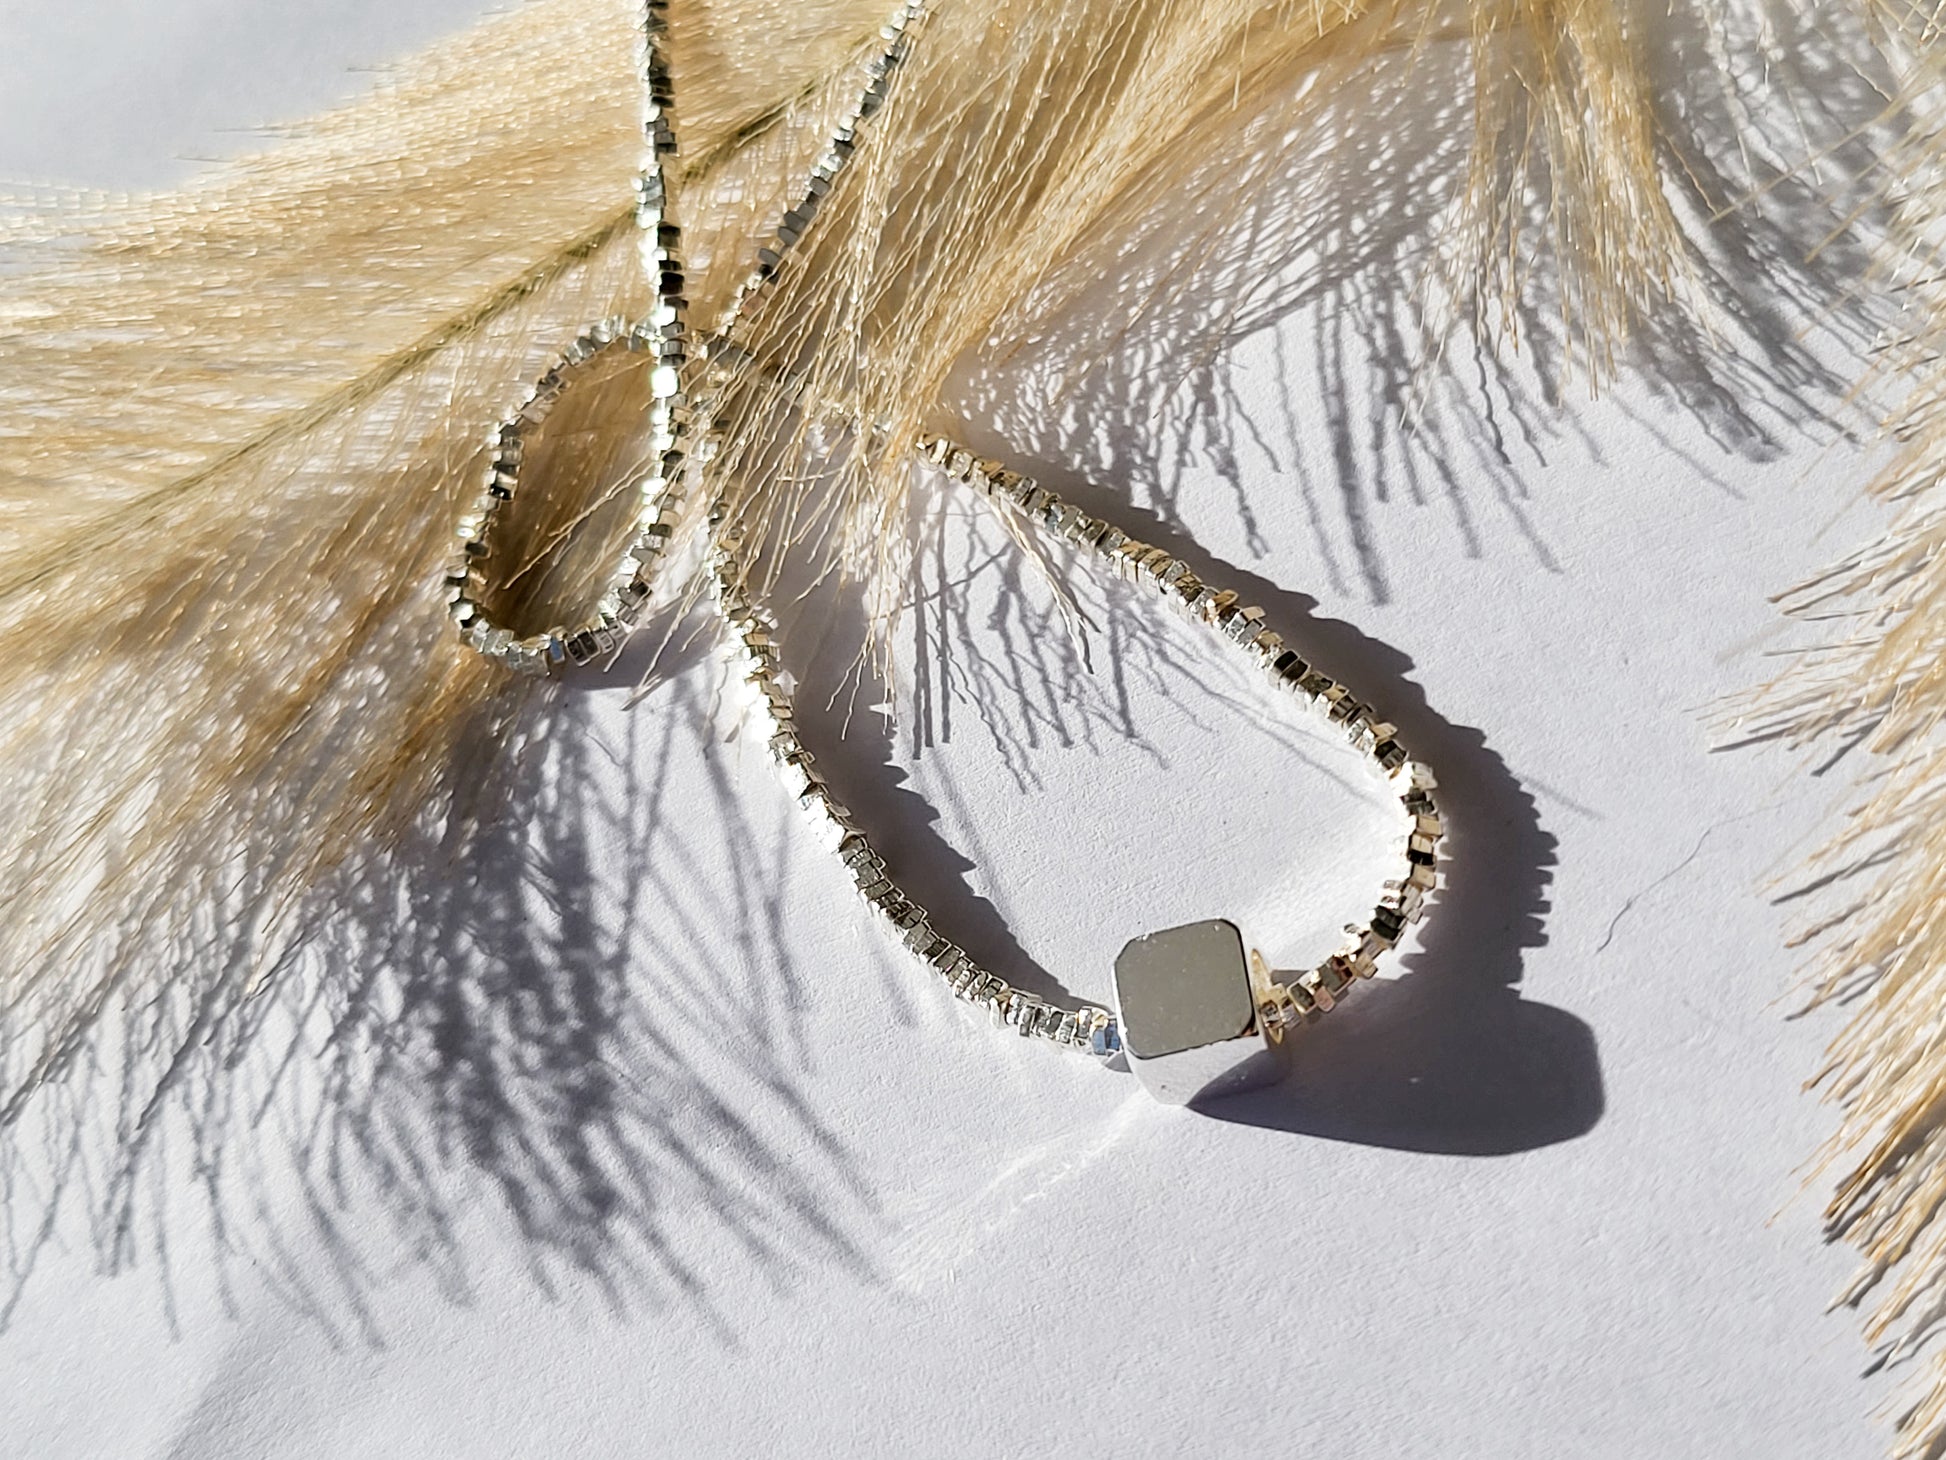 Silver Particle Necklace